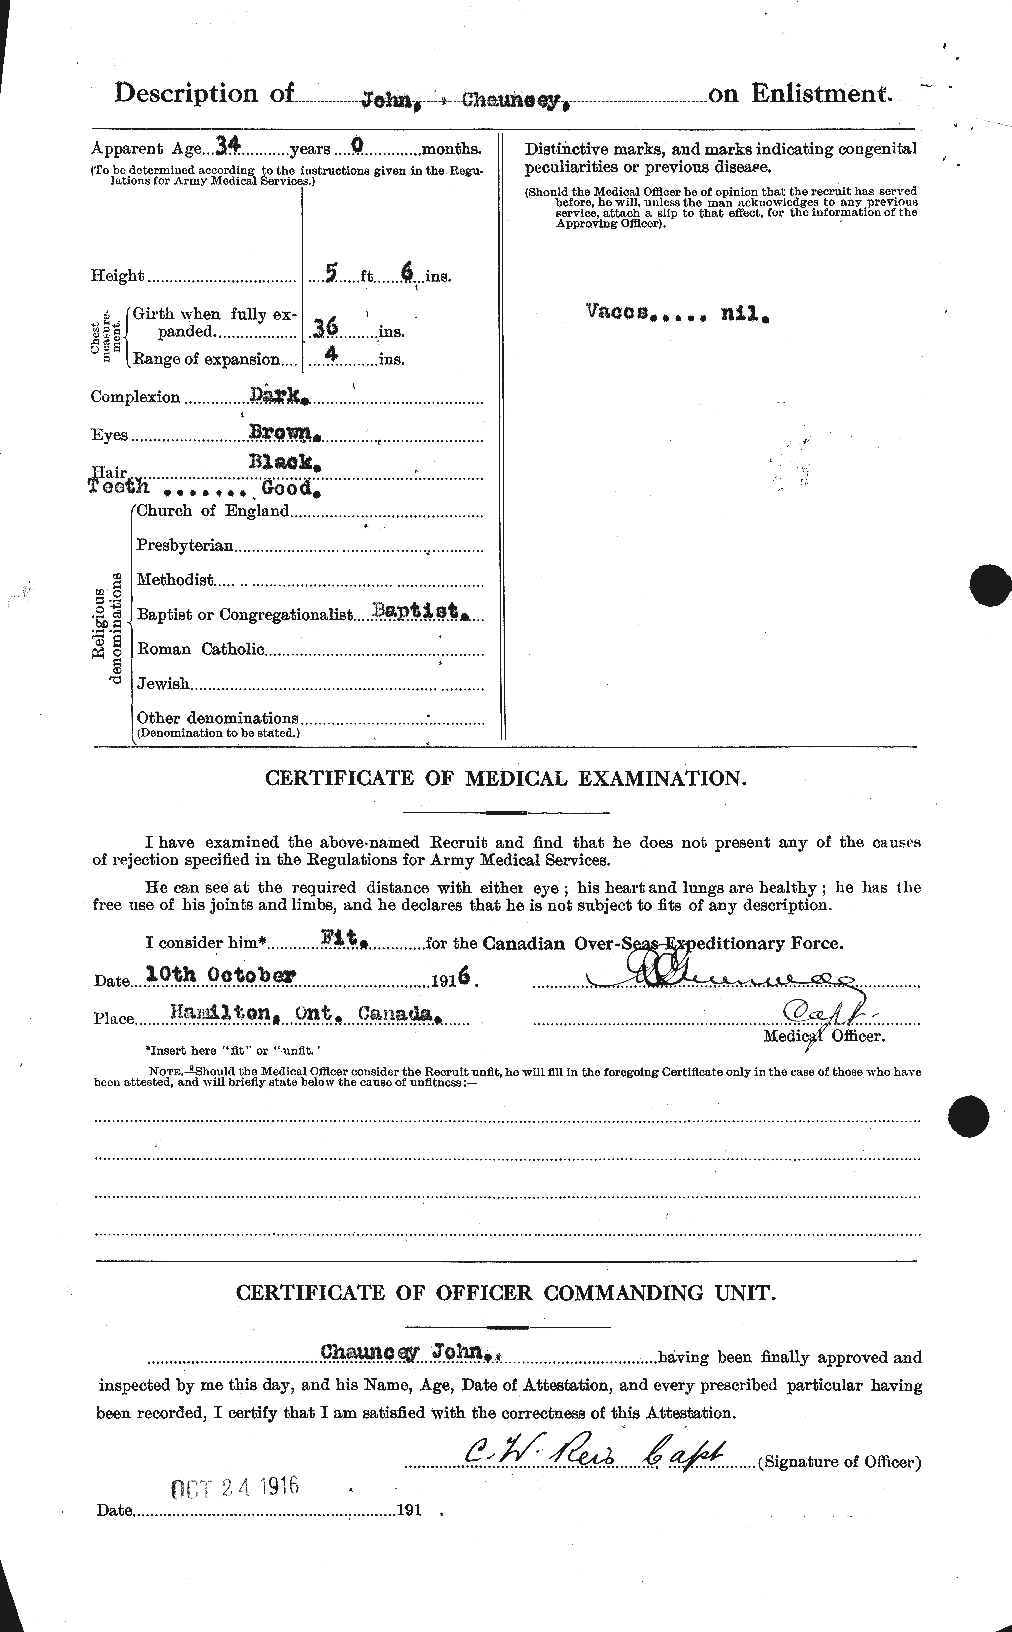 Personnel Records of the First World War - CEF 420217b